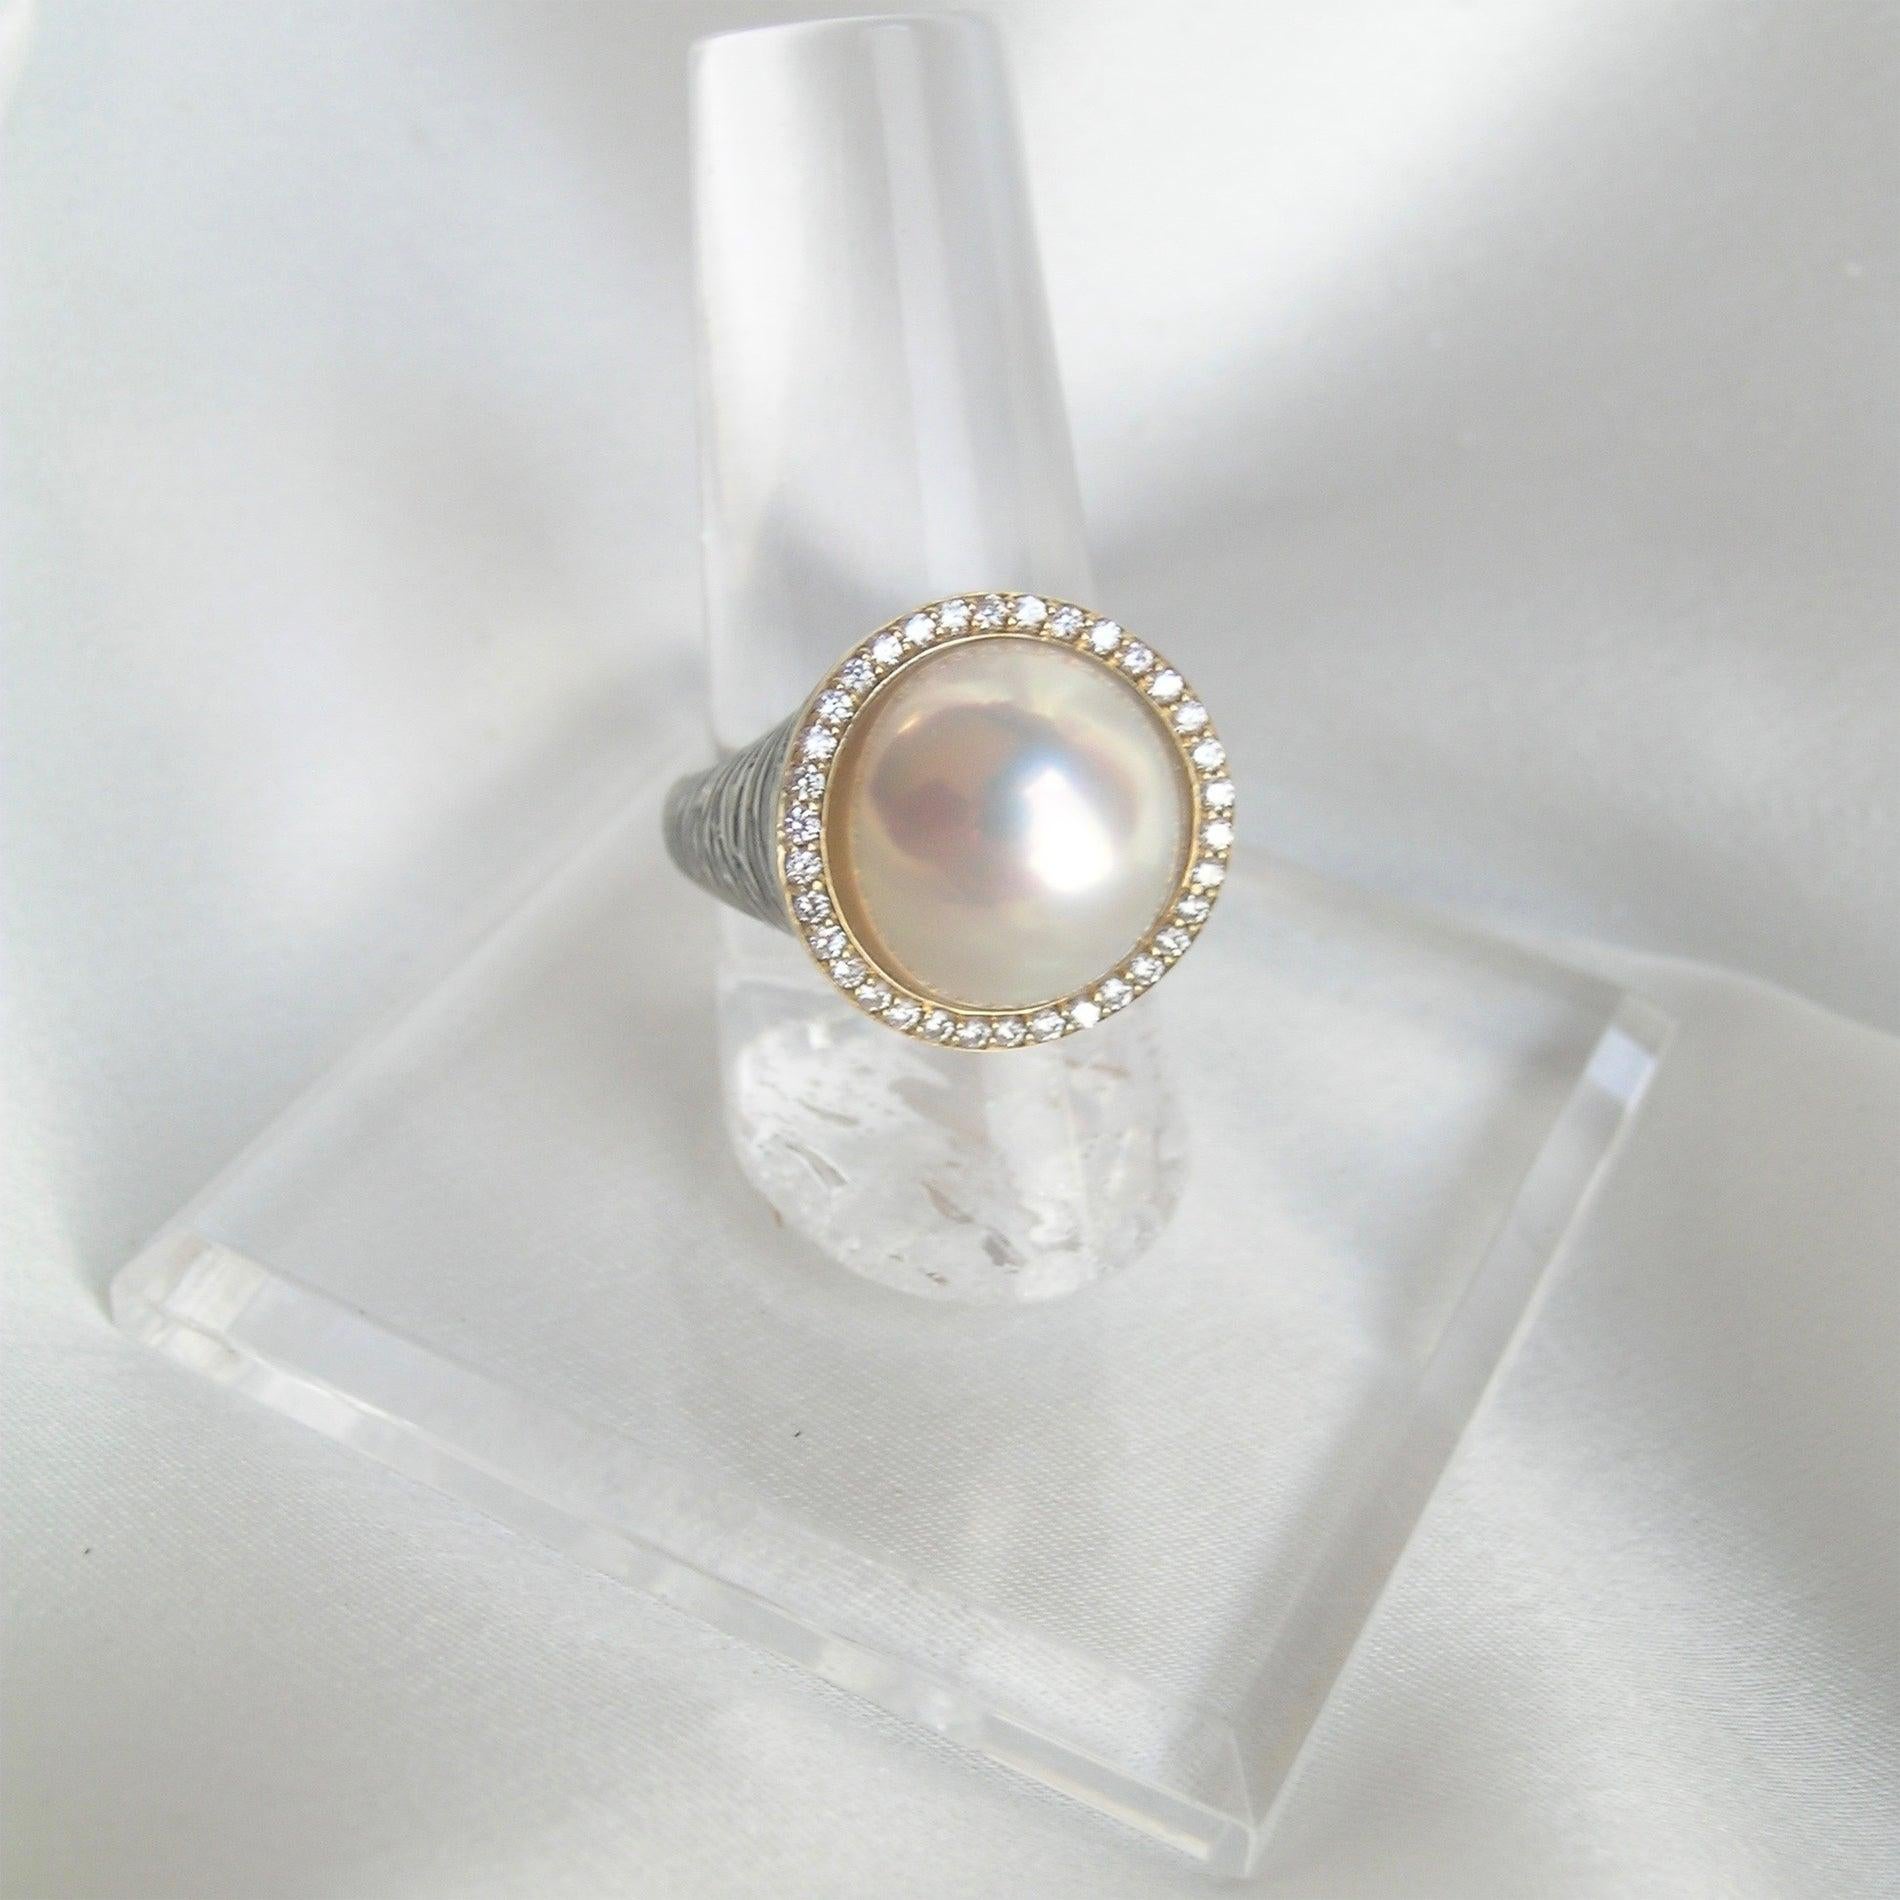 For Sale:  Mixed Metal Cocktail Ring with Silver, Yellow Gold, Diamond and Mabe Pearl 4